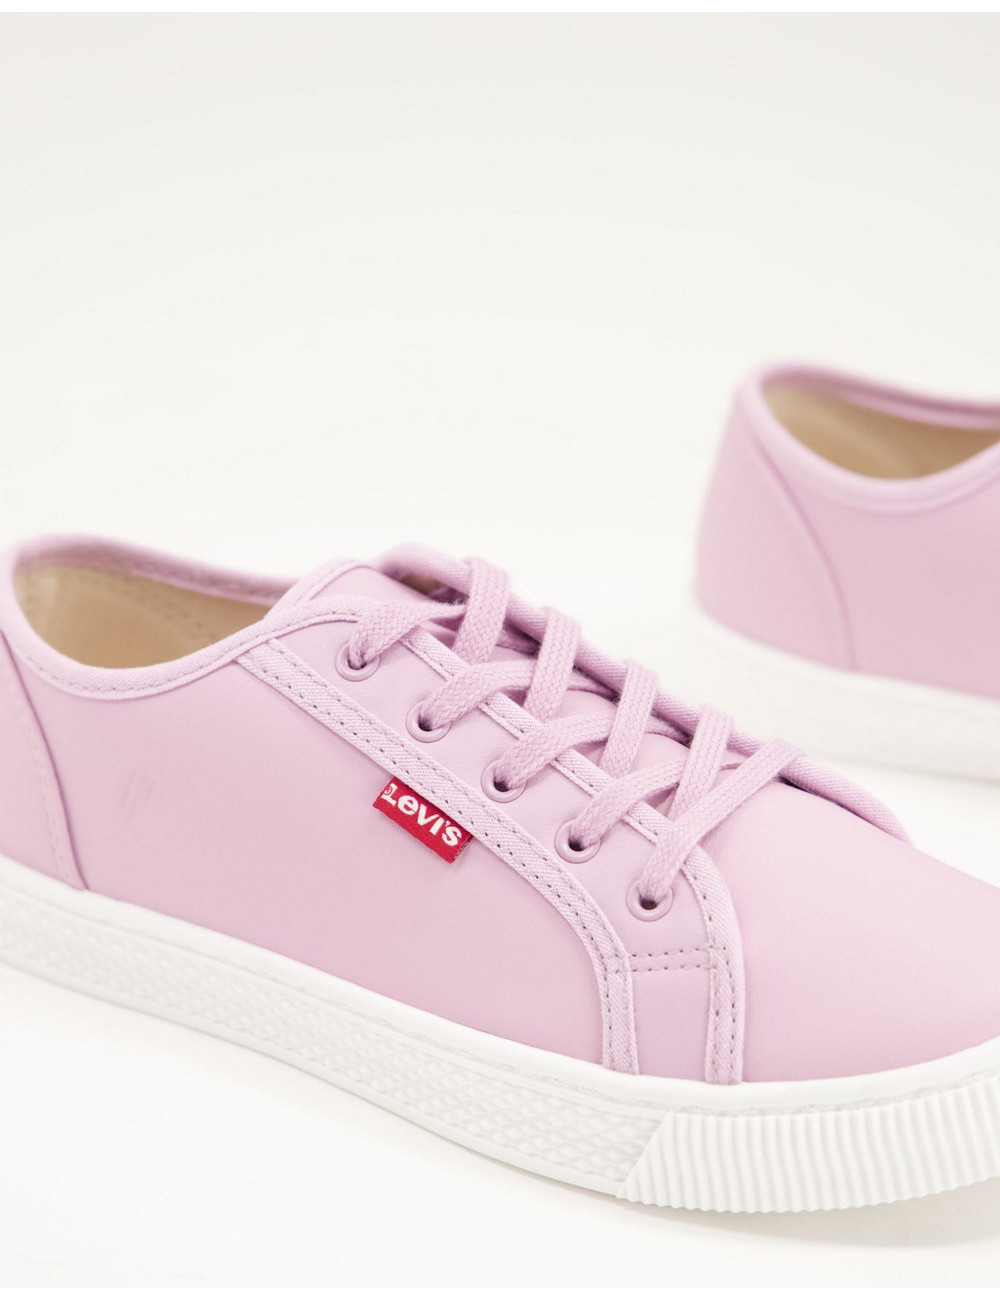 Levi's recycled PU sneaker...